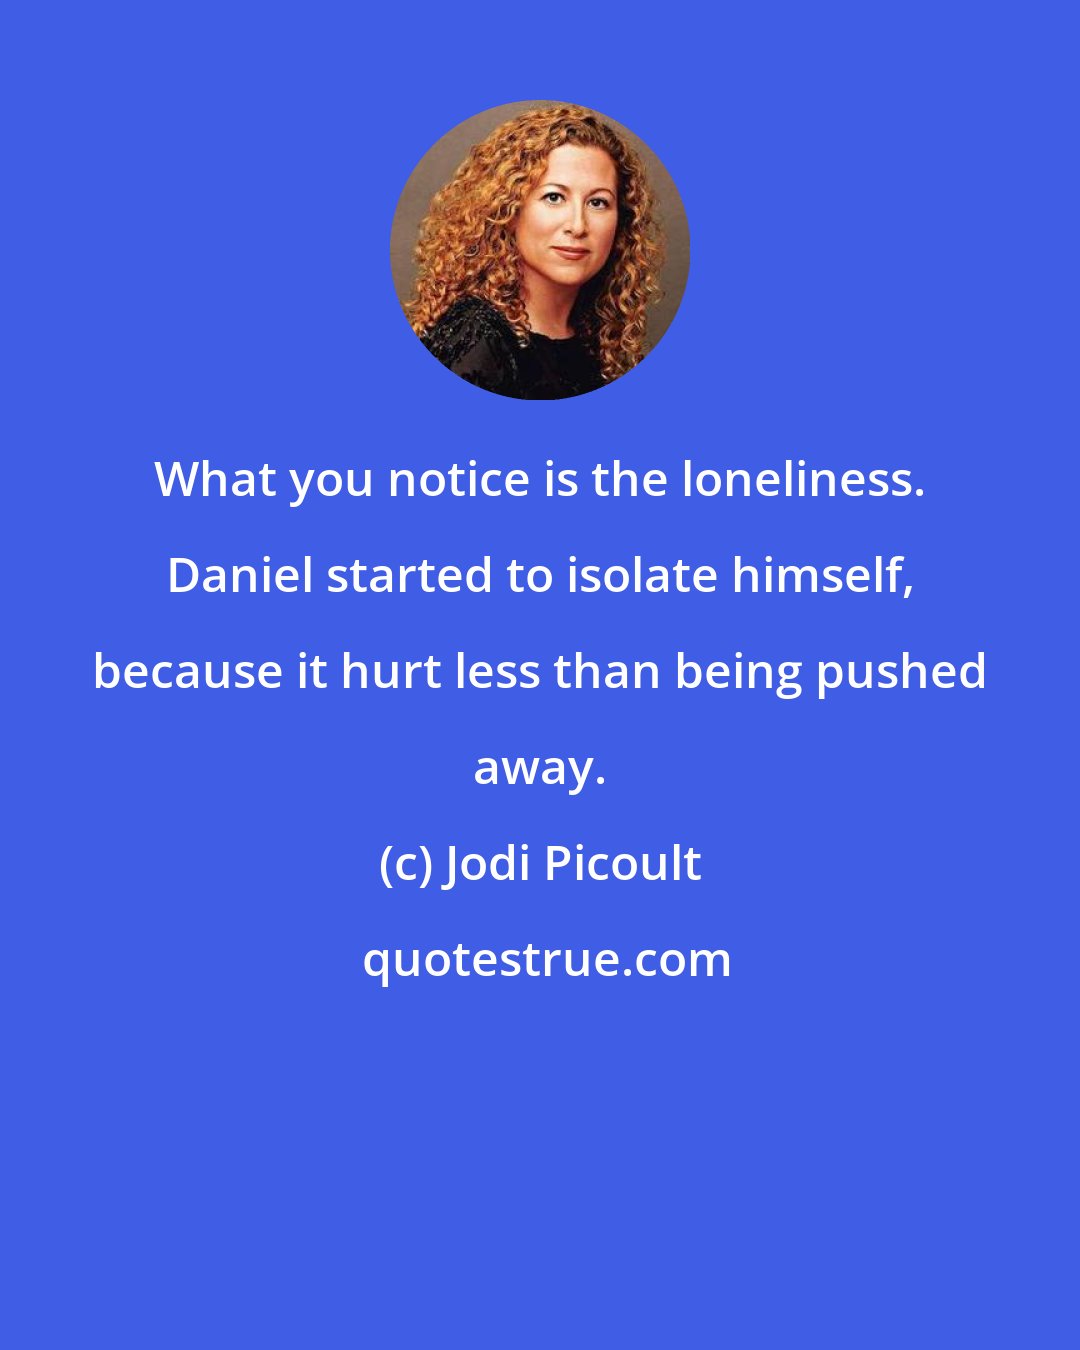 Jodi Picoult: What you notice is the loneliness. Daniel started to isolate himself, because it hurt less than being pushed away.